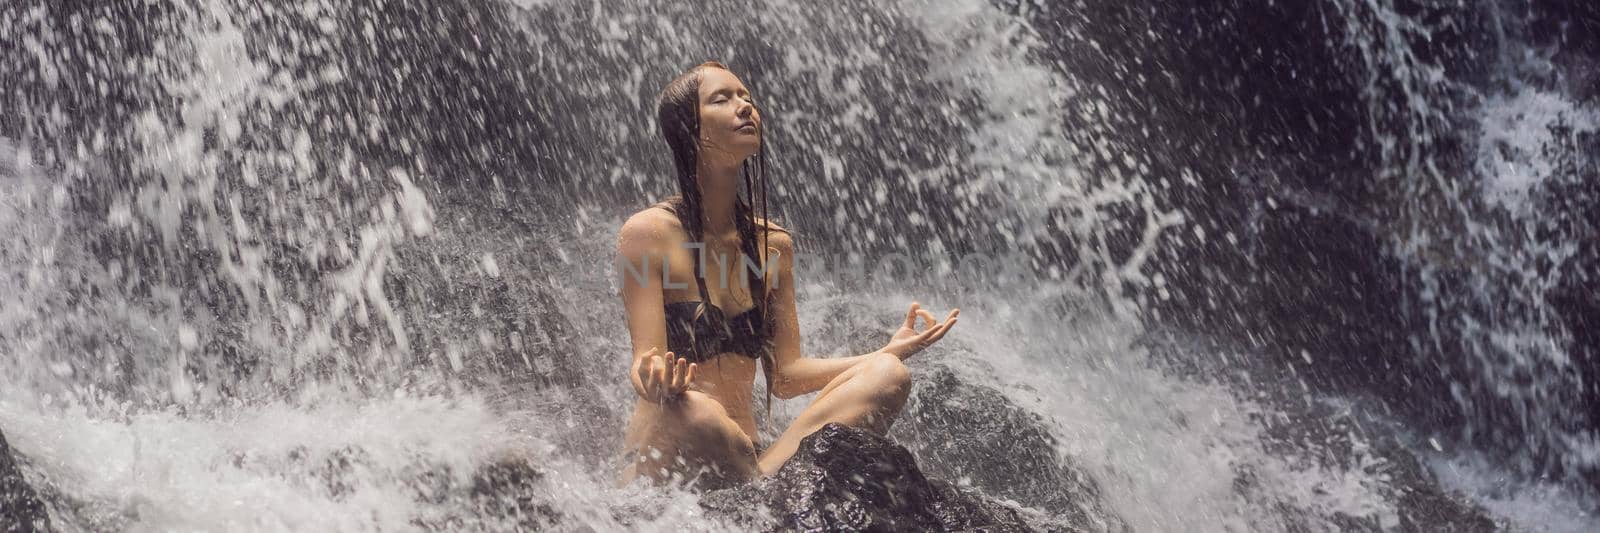 Wellness spa, vacation and yoga meditation concept. Young woman sitting in lotus position on the rock in tropical waterfall. BANNER, LONG FORMAT